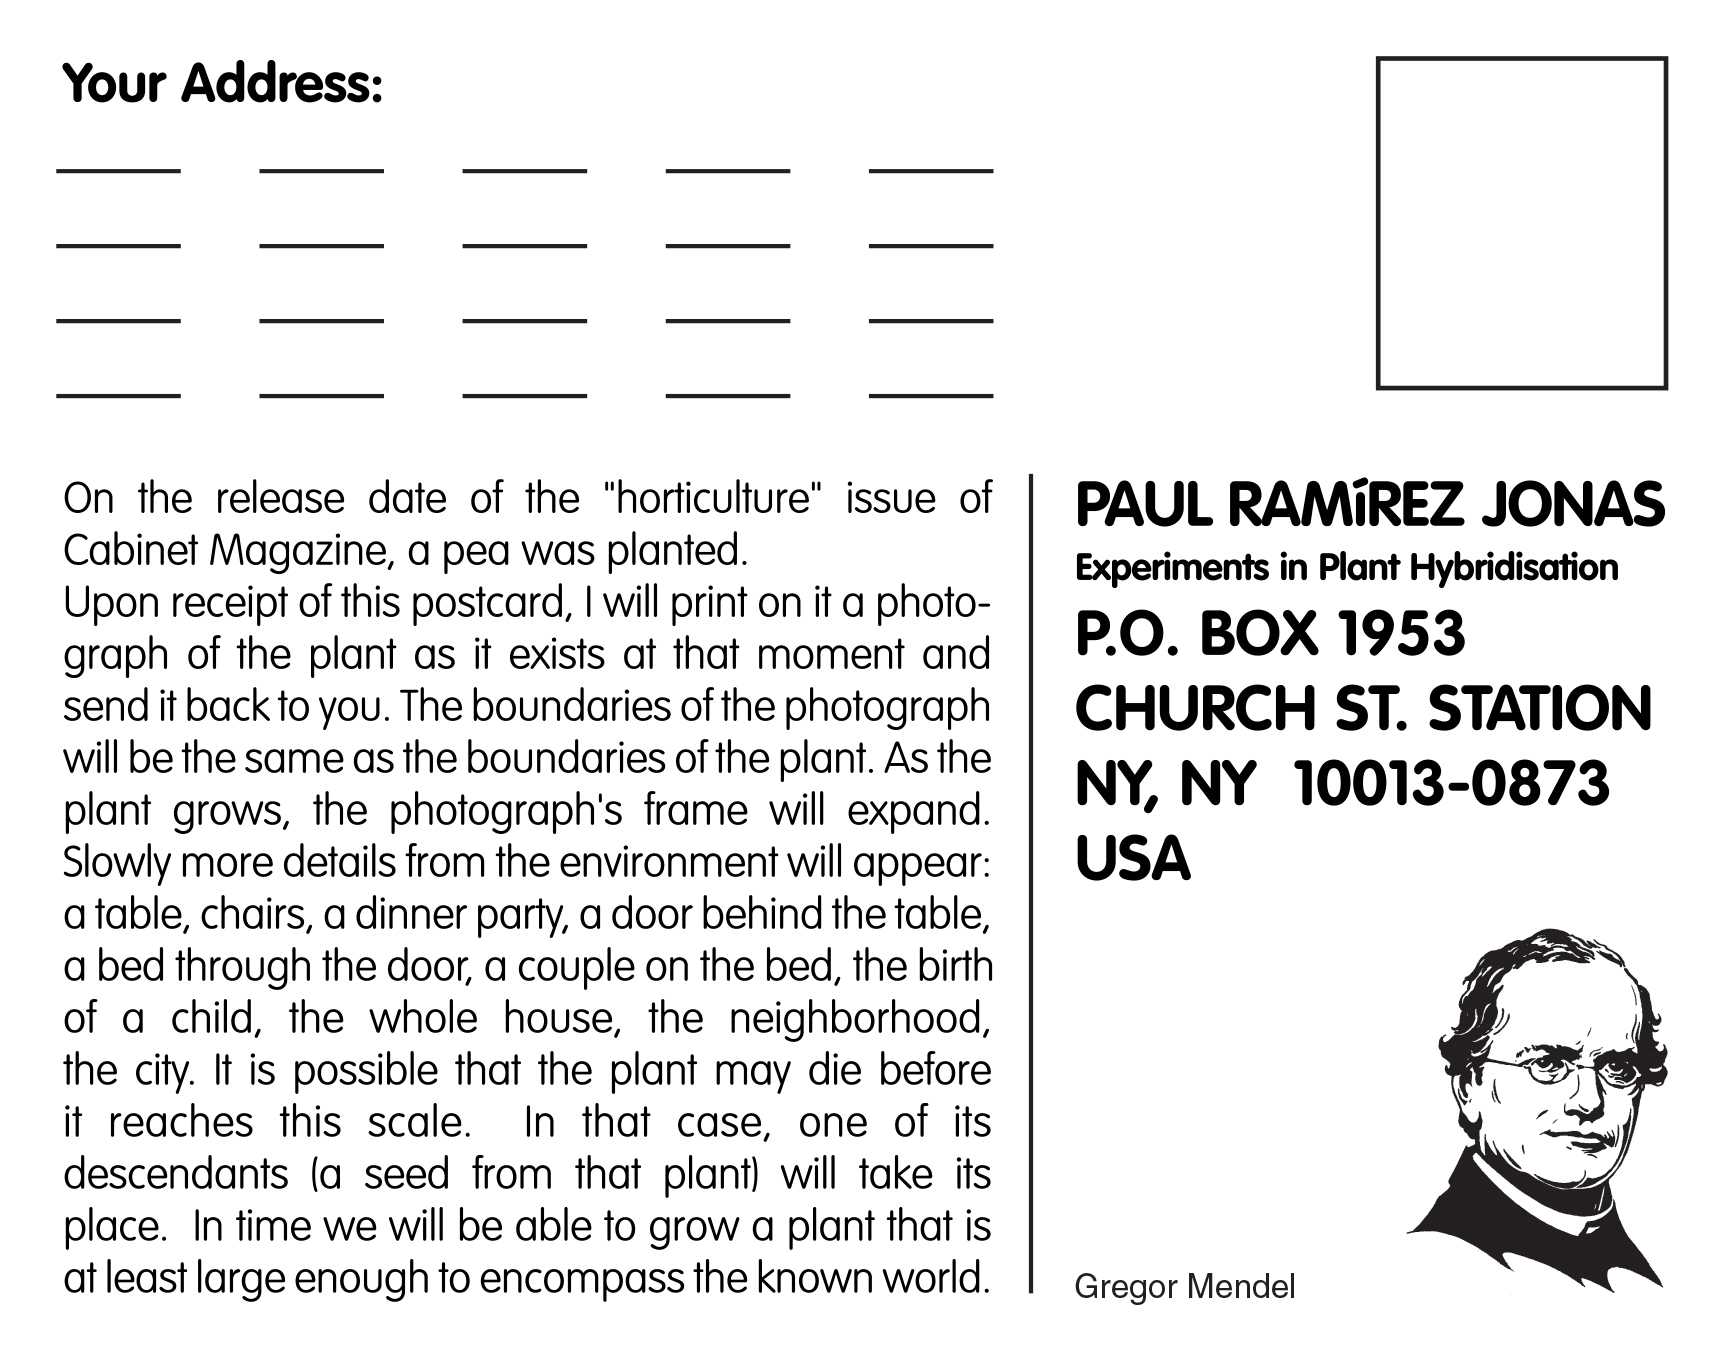 A postcard created by artist Paul Ramírez Jonas, addressed to himself care of “Experiments in Plant Hybridisation,” and bearing a drawing of the biologist Gregor Mendel. The text on the postcard reads: “On the release date of the “horticulture” issue of Cabinet Magazine, a pea was planted. Upon receipt of this postcard, I will print on it a photograph of the plant as it exists at that moment and send it back to you. The boundaries of the photograph will be the same as the boundaries of the plant. As the plant grows, the photograph’s frame will expand. Slowly more details from the environment will appear: a table, chairs, a dinner party, a door behind the table, a bed through the door, a couple on the bed, the birth of a child, the whole house, the neighborhood, the city. It is possible that the plant may die before it reaches this scale. In that case, one of its descendants (a seed from that plant) will take its place. In time we will be able to grow a plant that is at least large enough to encompass the known world. 